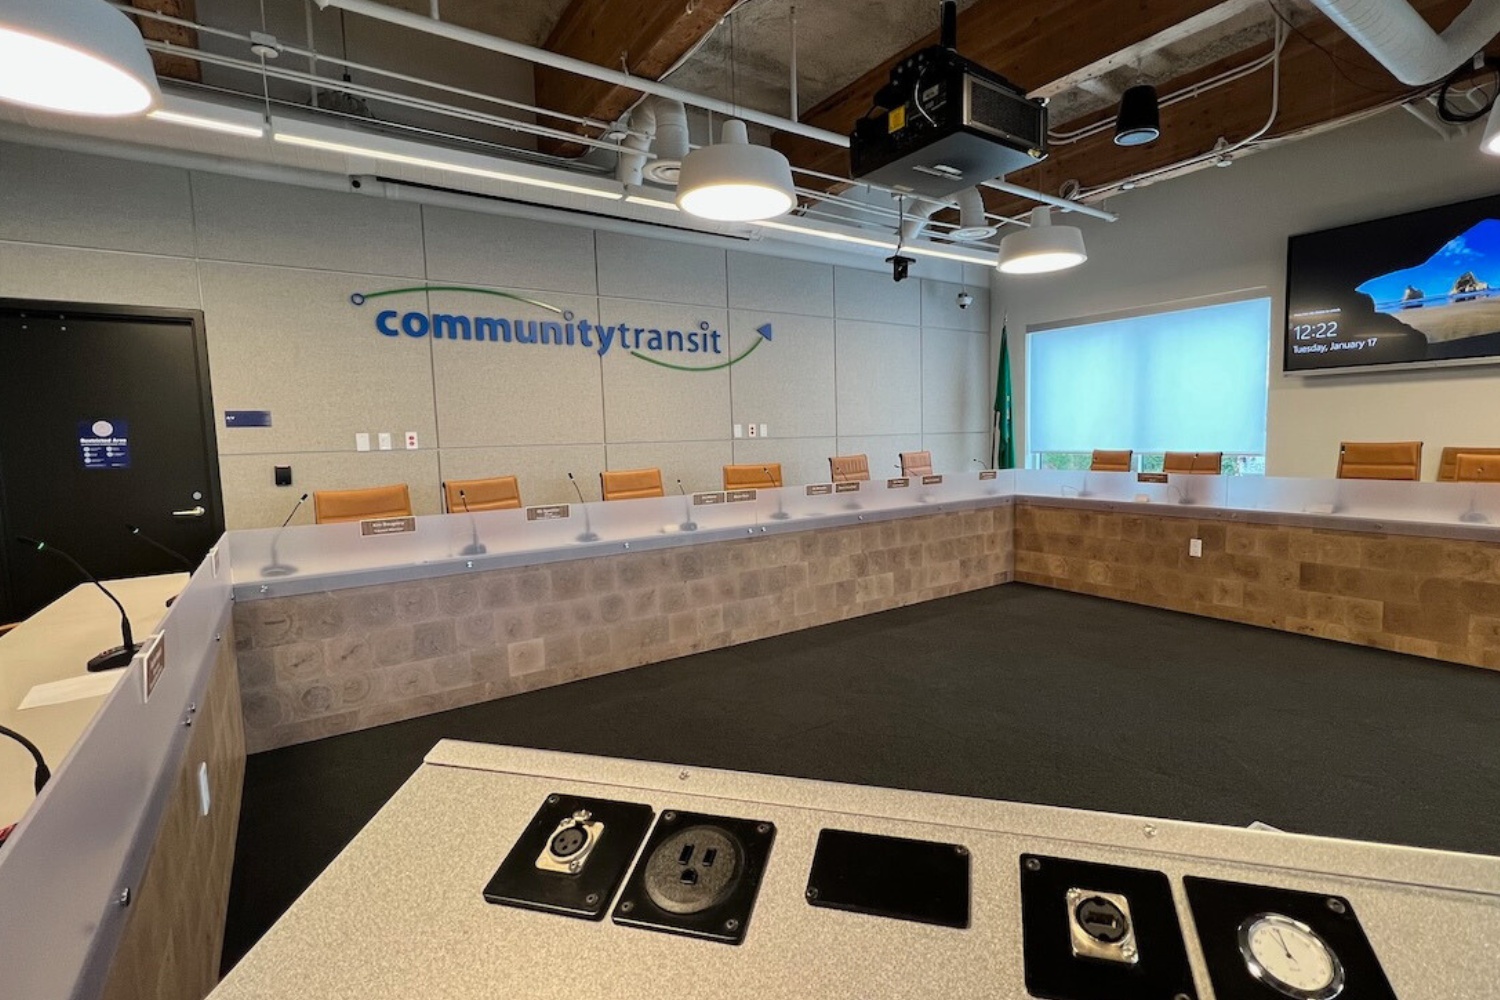 An empty board room with Community Transit's logo on the wall.